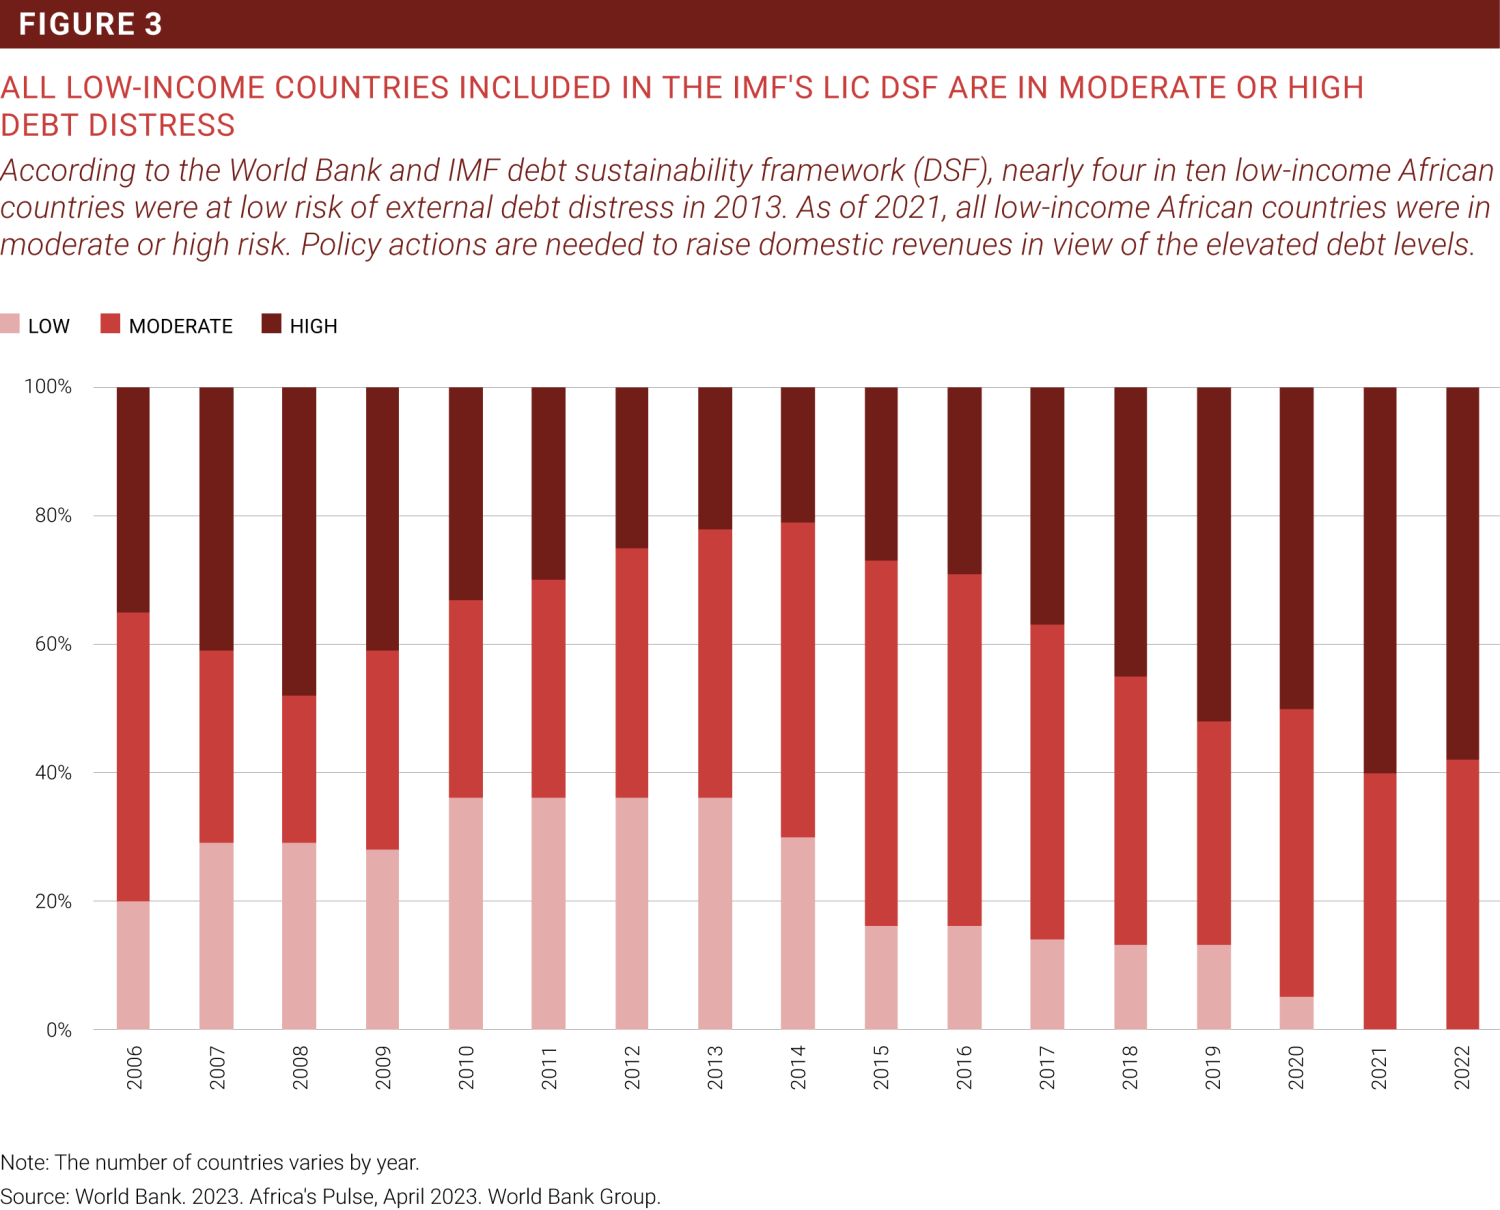 ALL LOW-INCOME COUNTRIES INCLUDED IN THE IMF'S LIC DSF ARE IN MODERATE OR HIGH DEBT DISTRESS